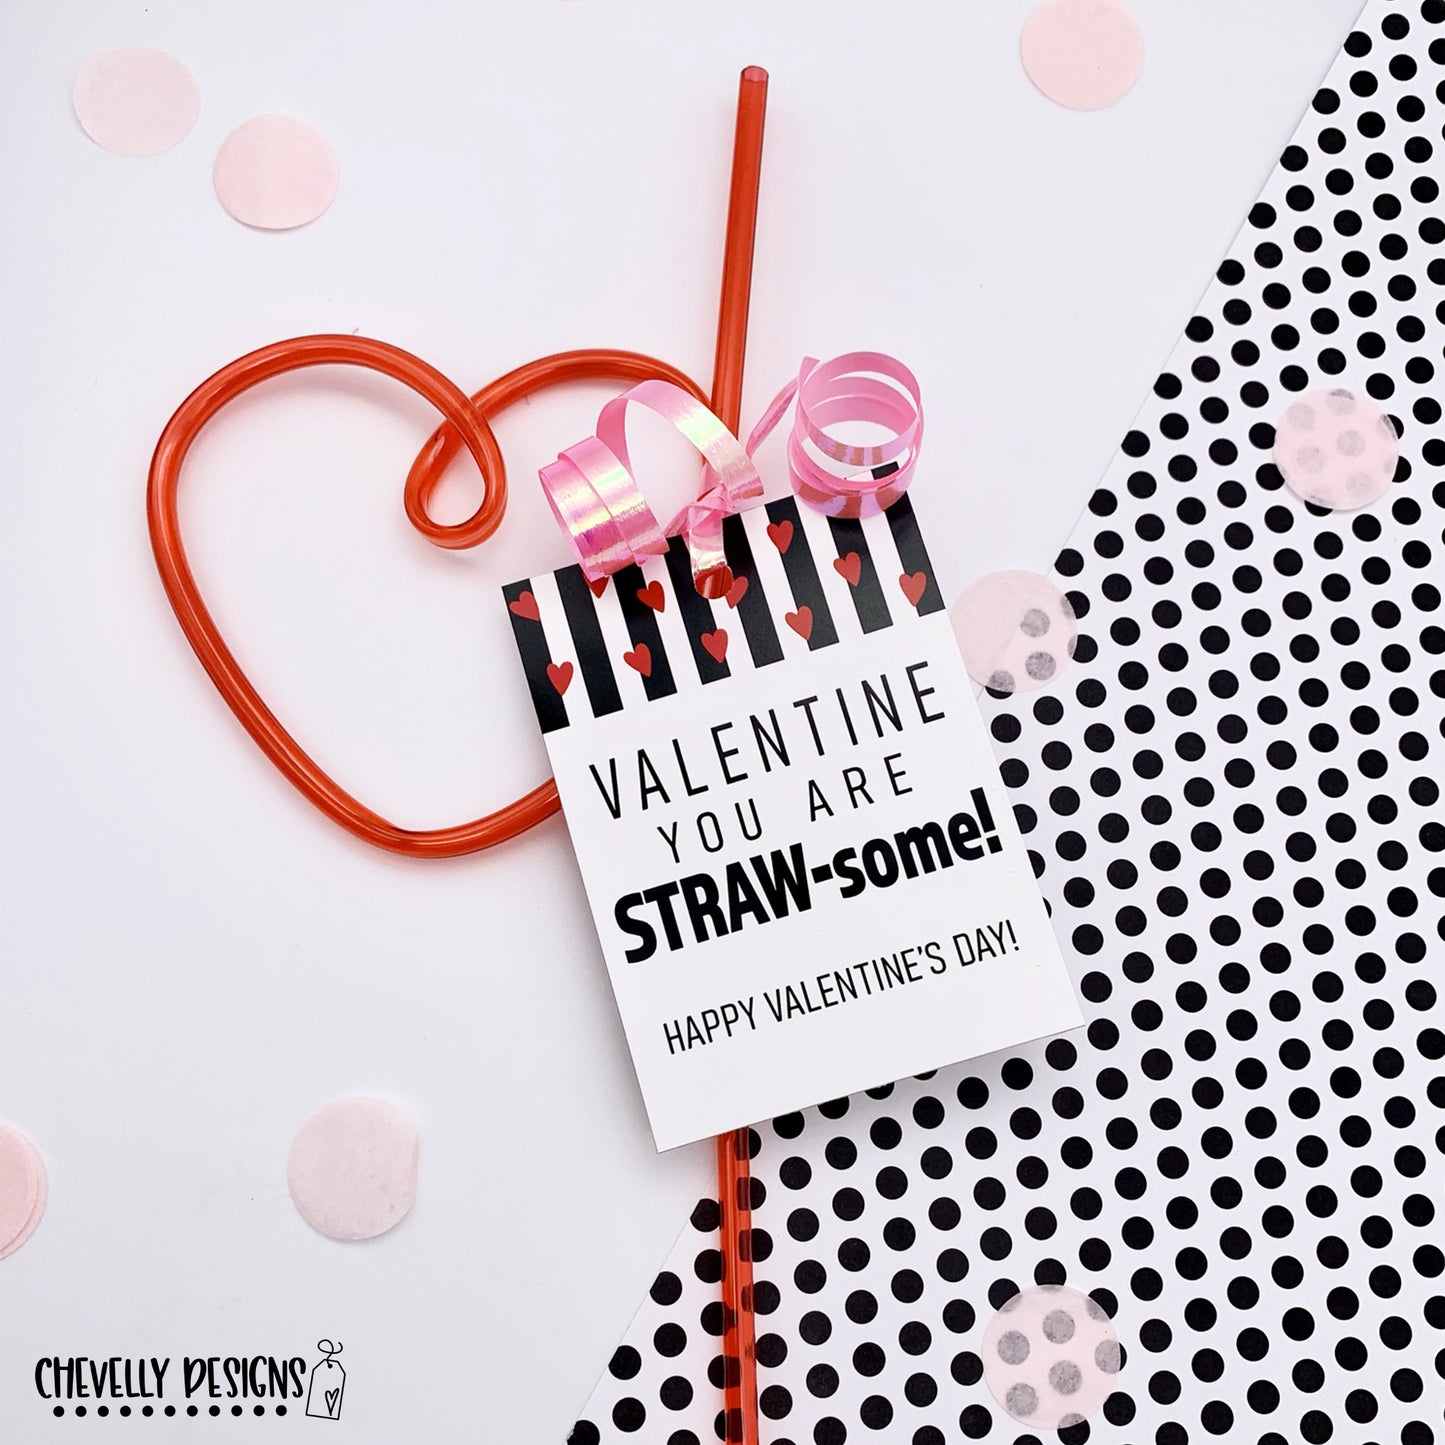 Printable Valentine Cards - You are STRAW-some - Gift Tags >>>Instant Digital Download<<<